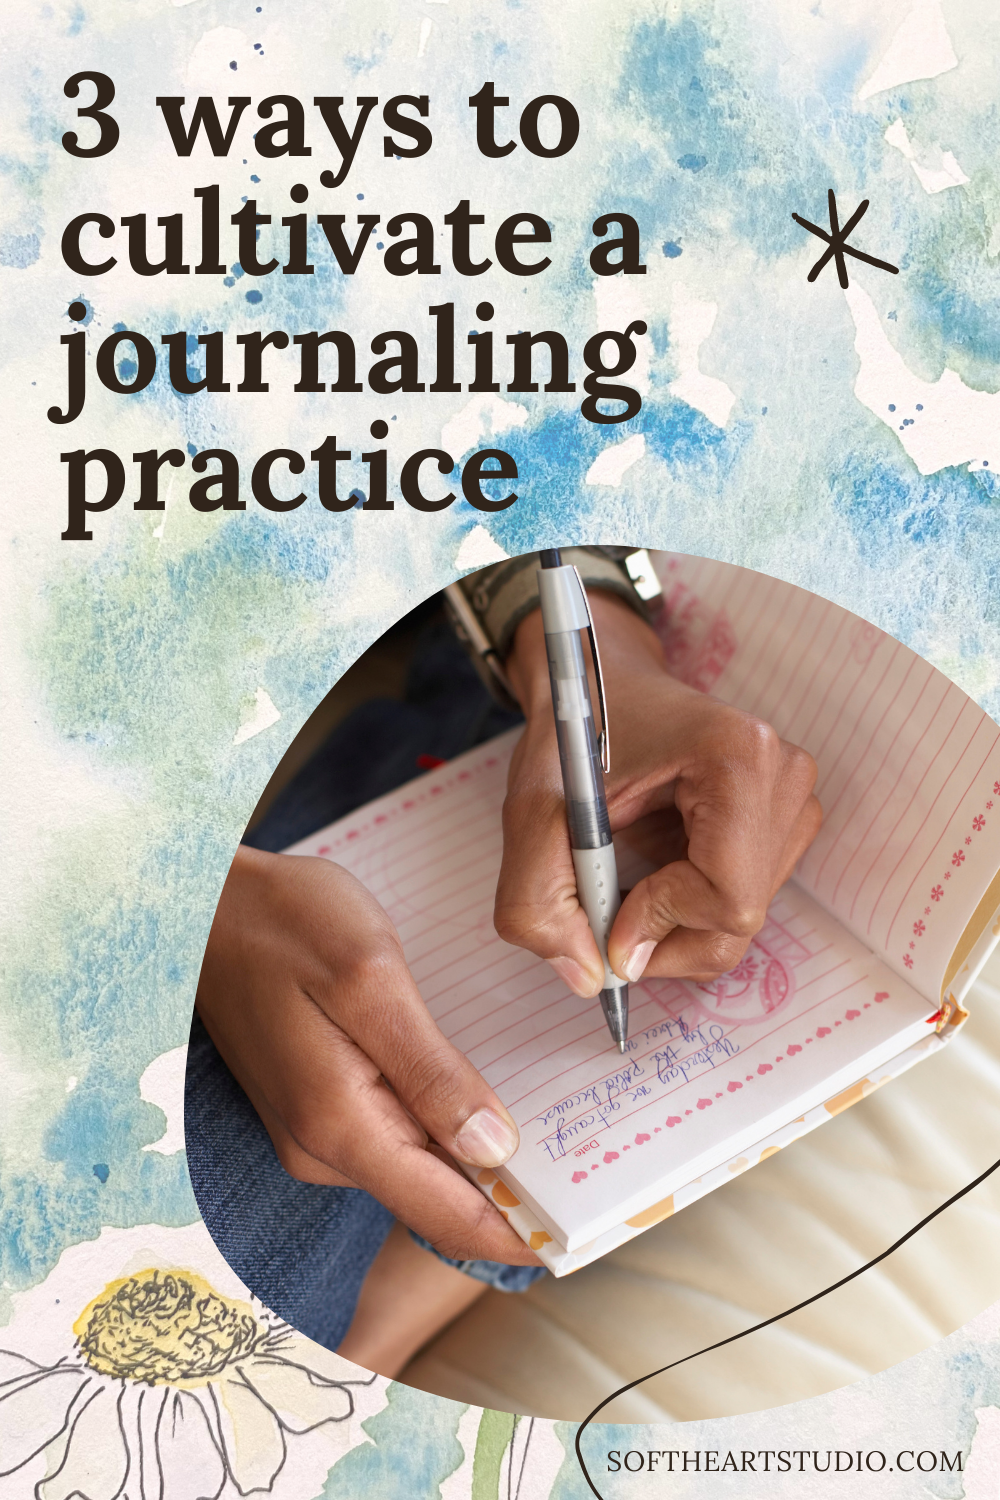 3 ways to cultivate a daily journaling practice